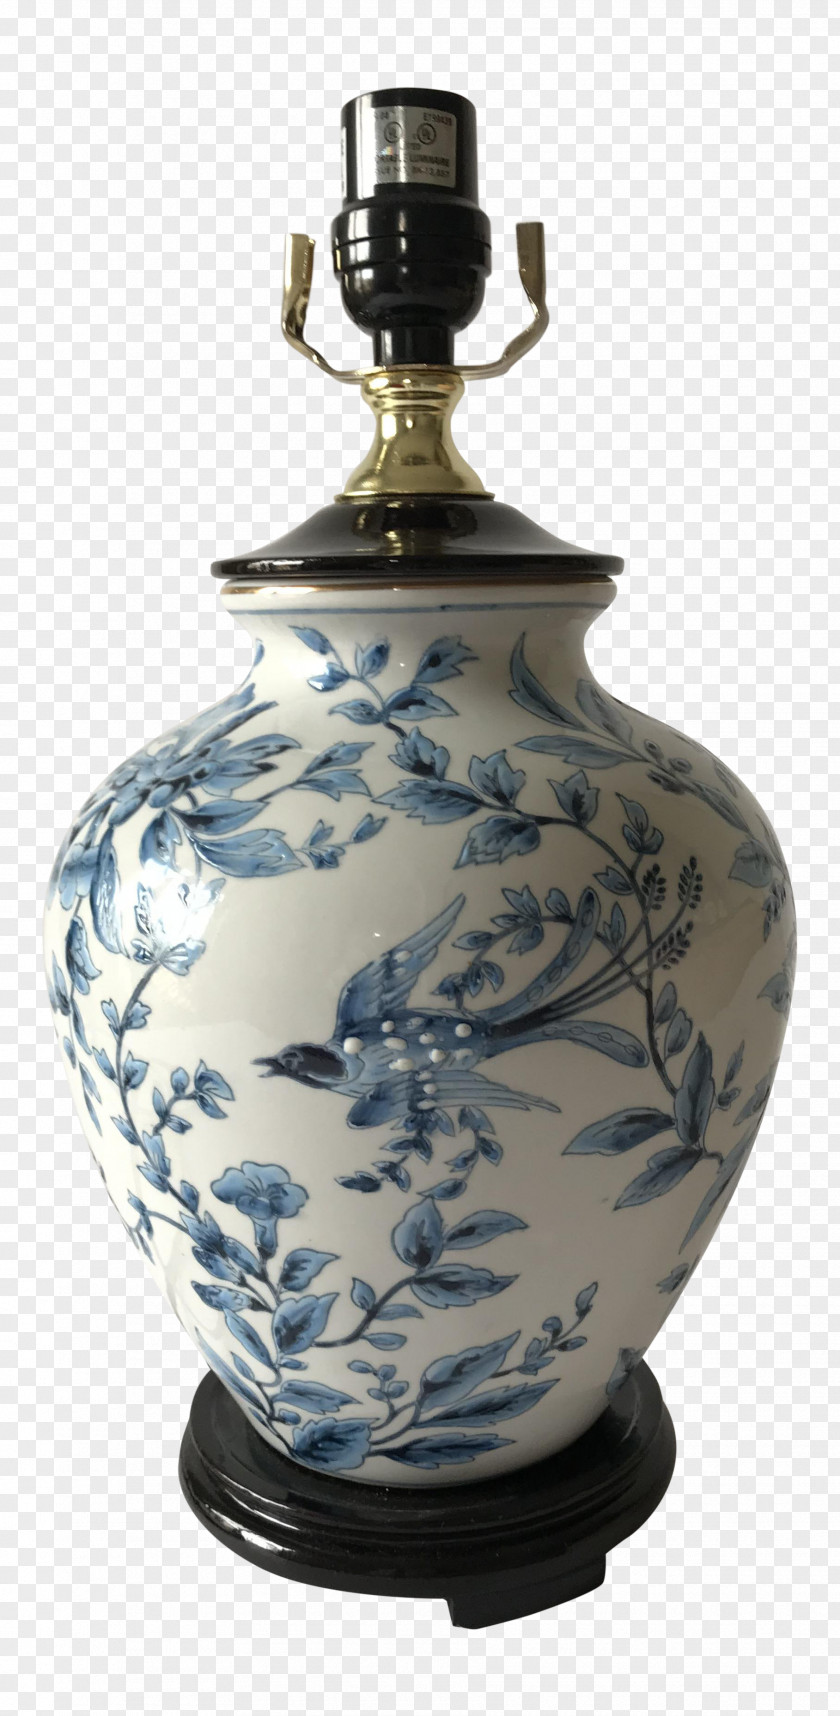 Chinoiserie Ceramic Blue And White Pottery Vase Porcelain PNG